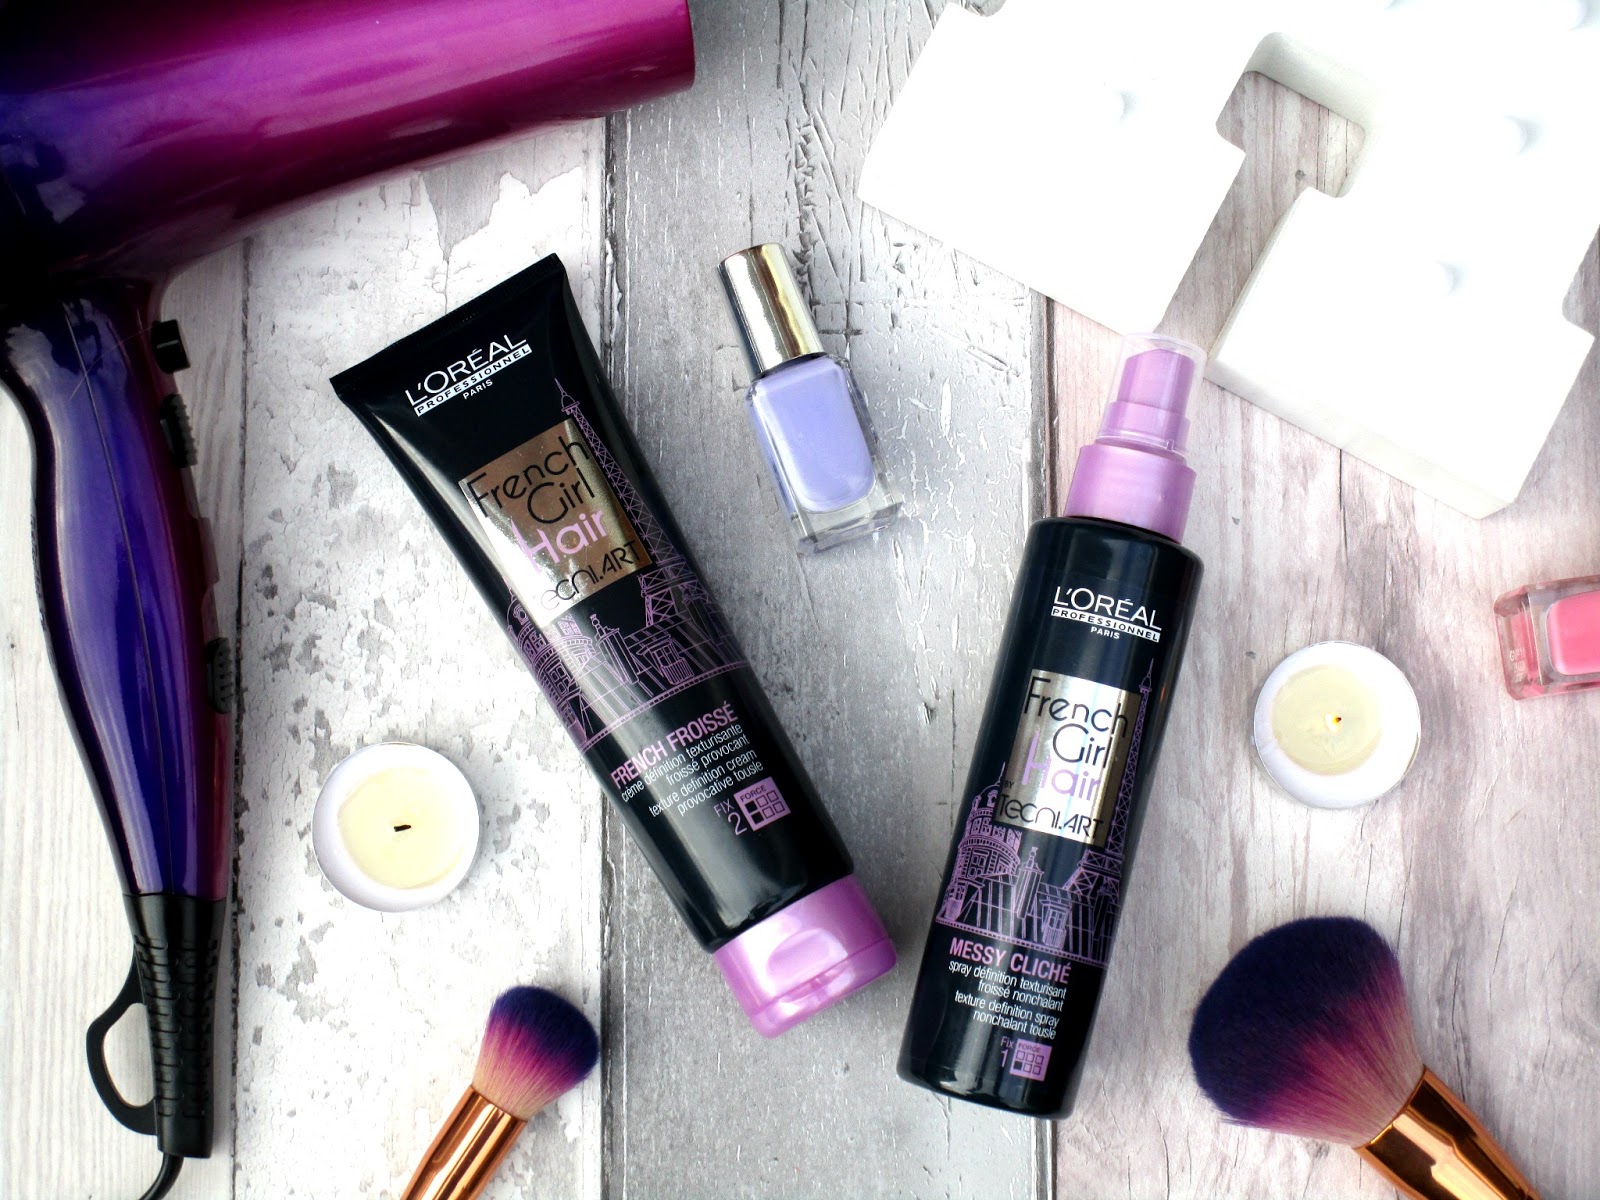 L'Oréal Professionnel French Girl Hair Collection Review